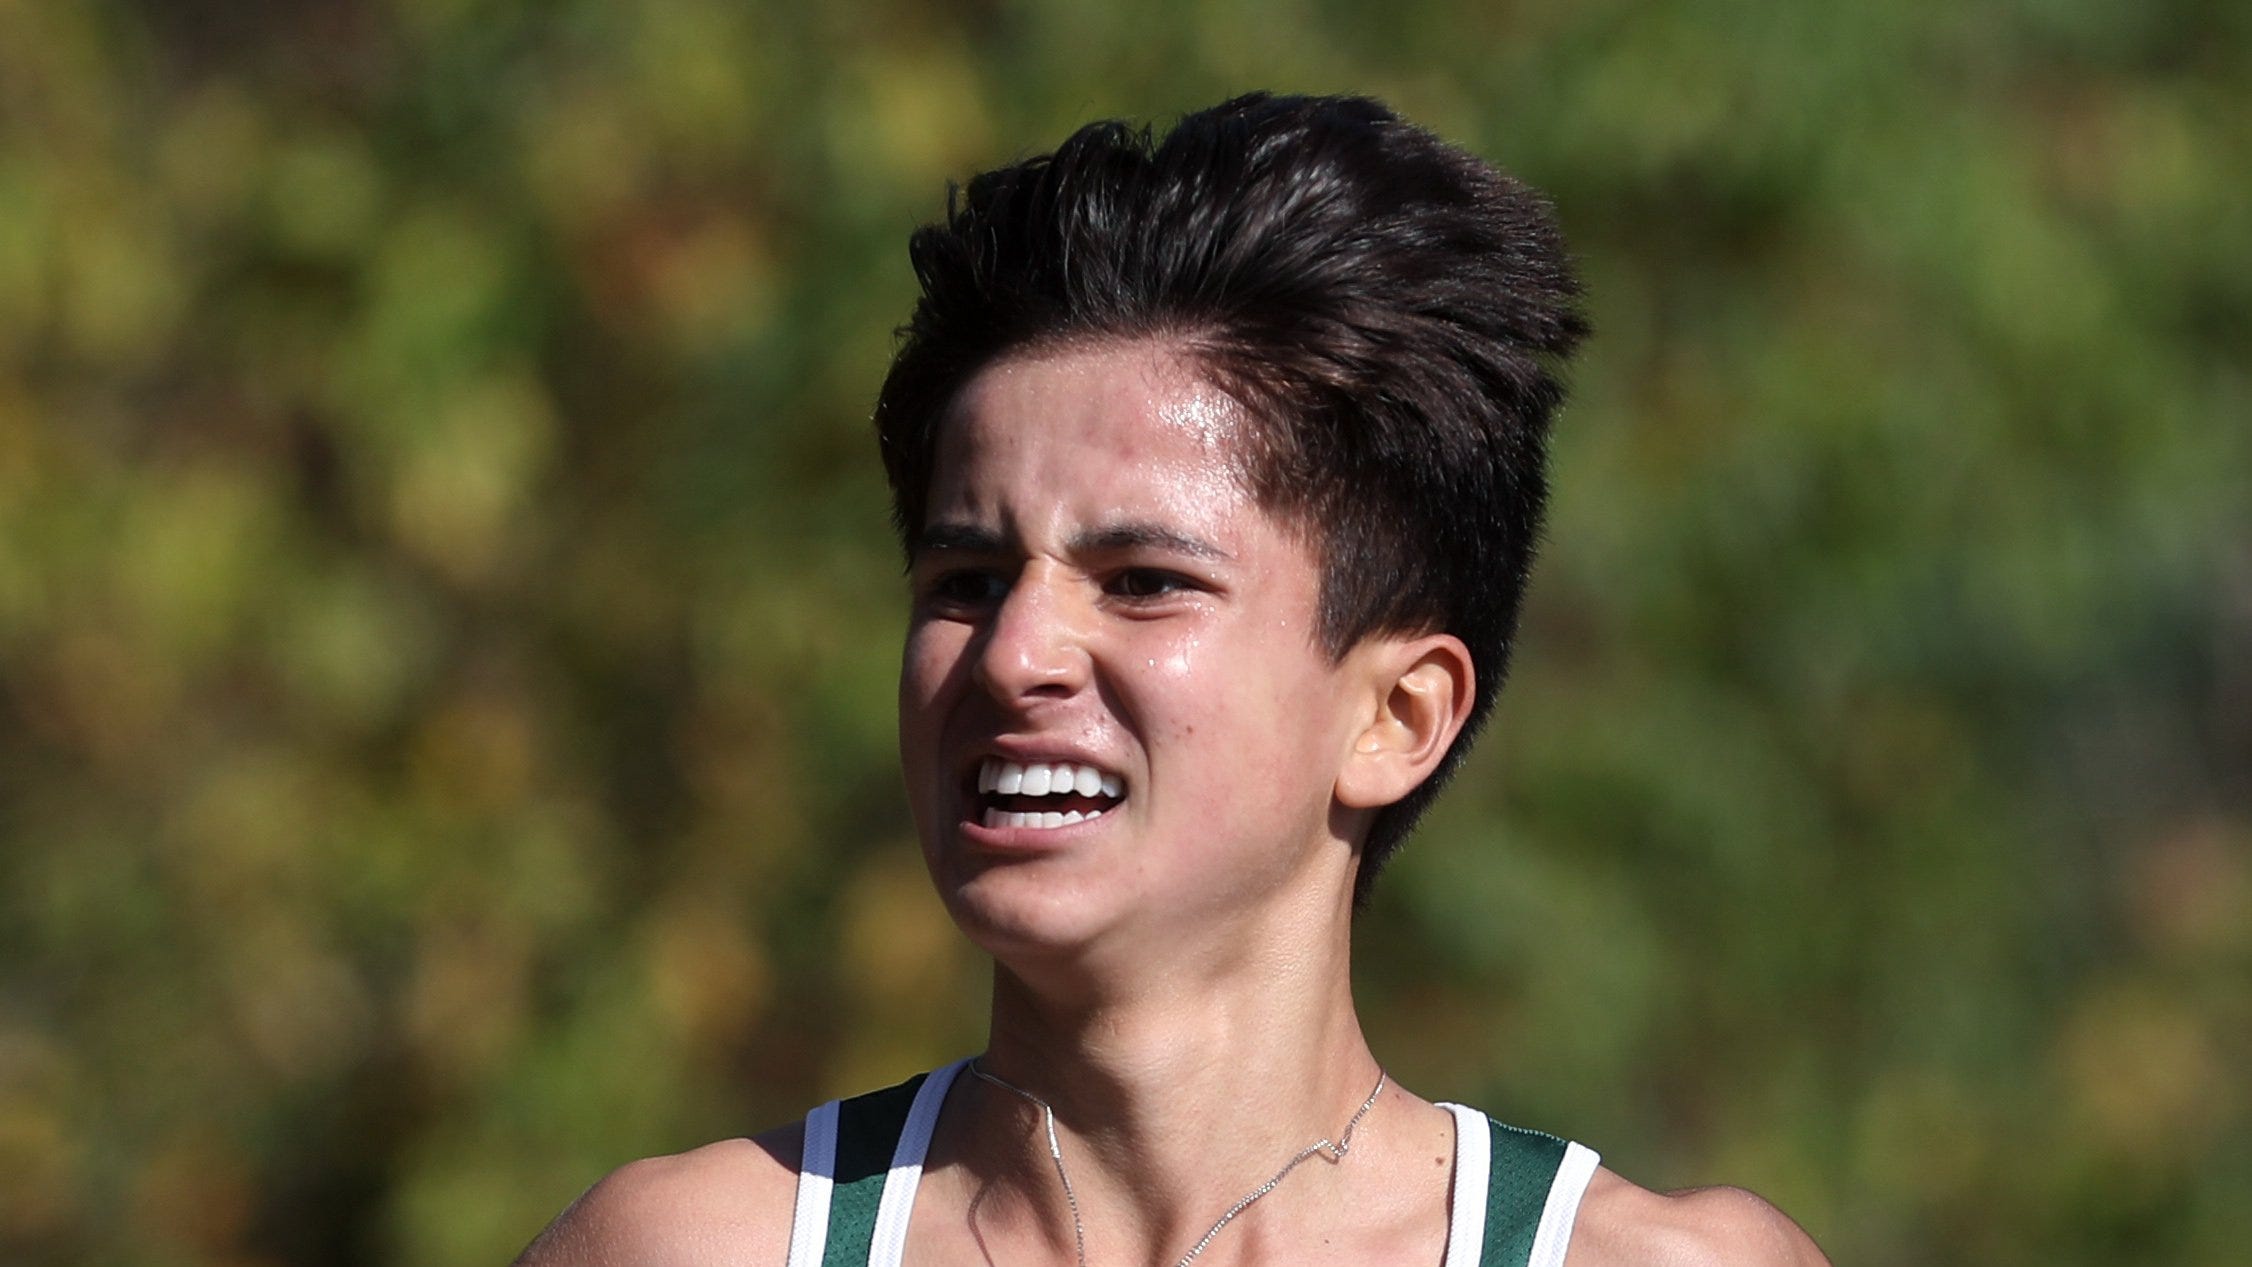 Notebook: Dublin Jerome runners sweep league championships